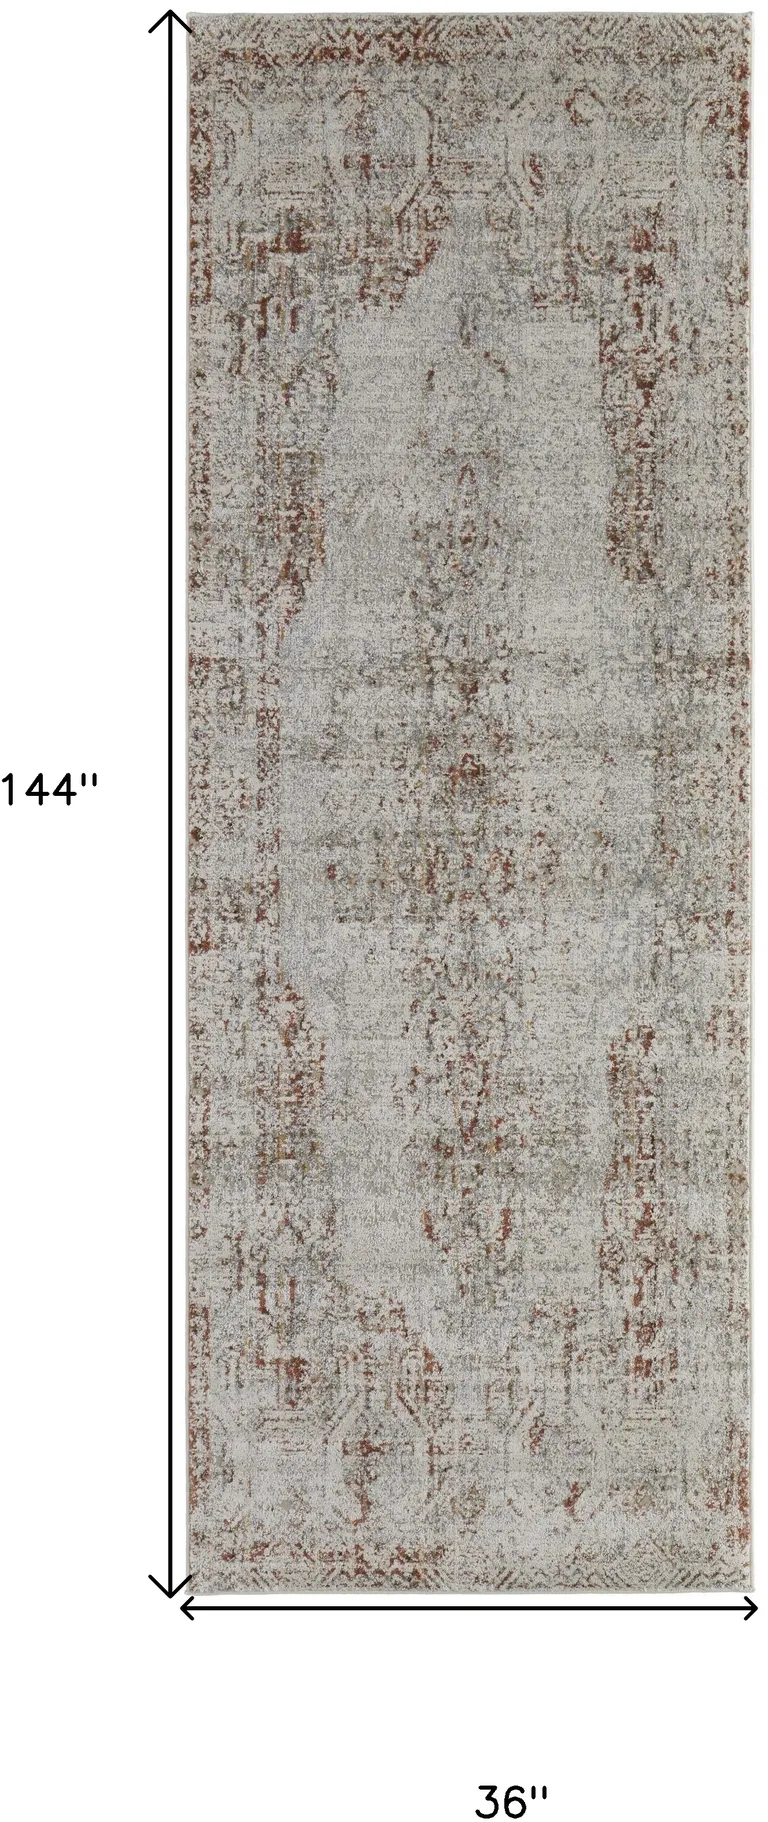 12' Tan Ivory And Orange Floral Power Loom Distressed Runner Rug With Fringe Photo 4